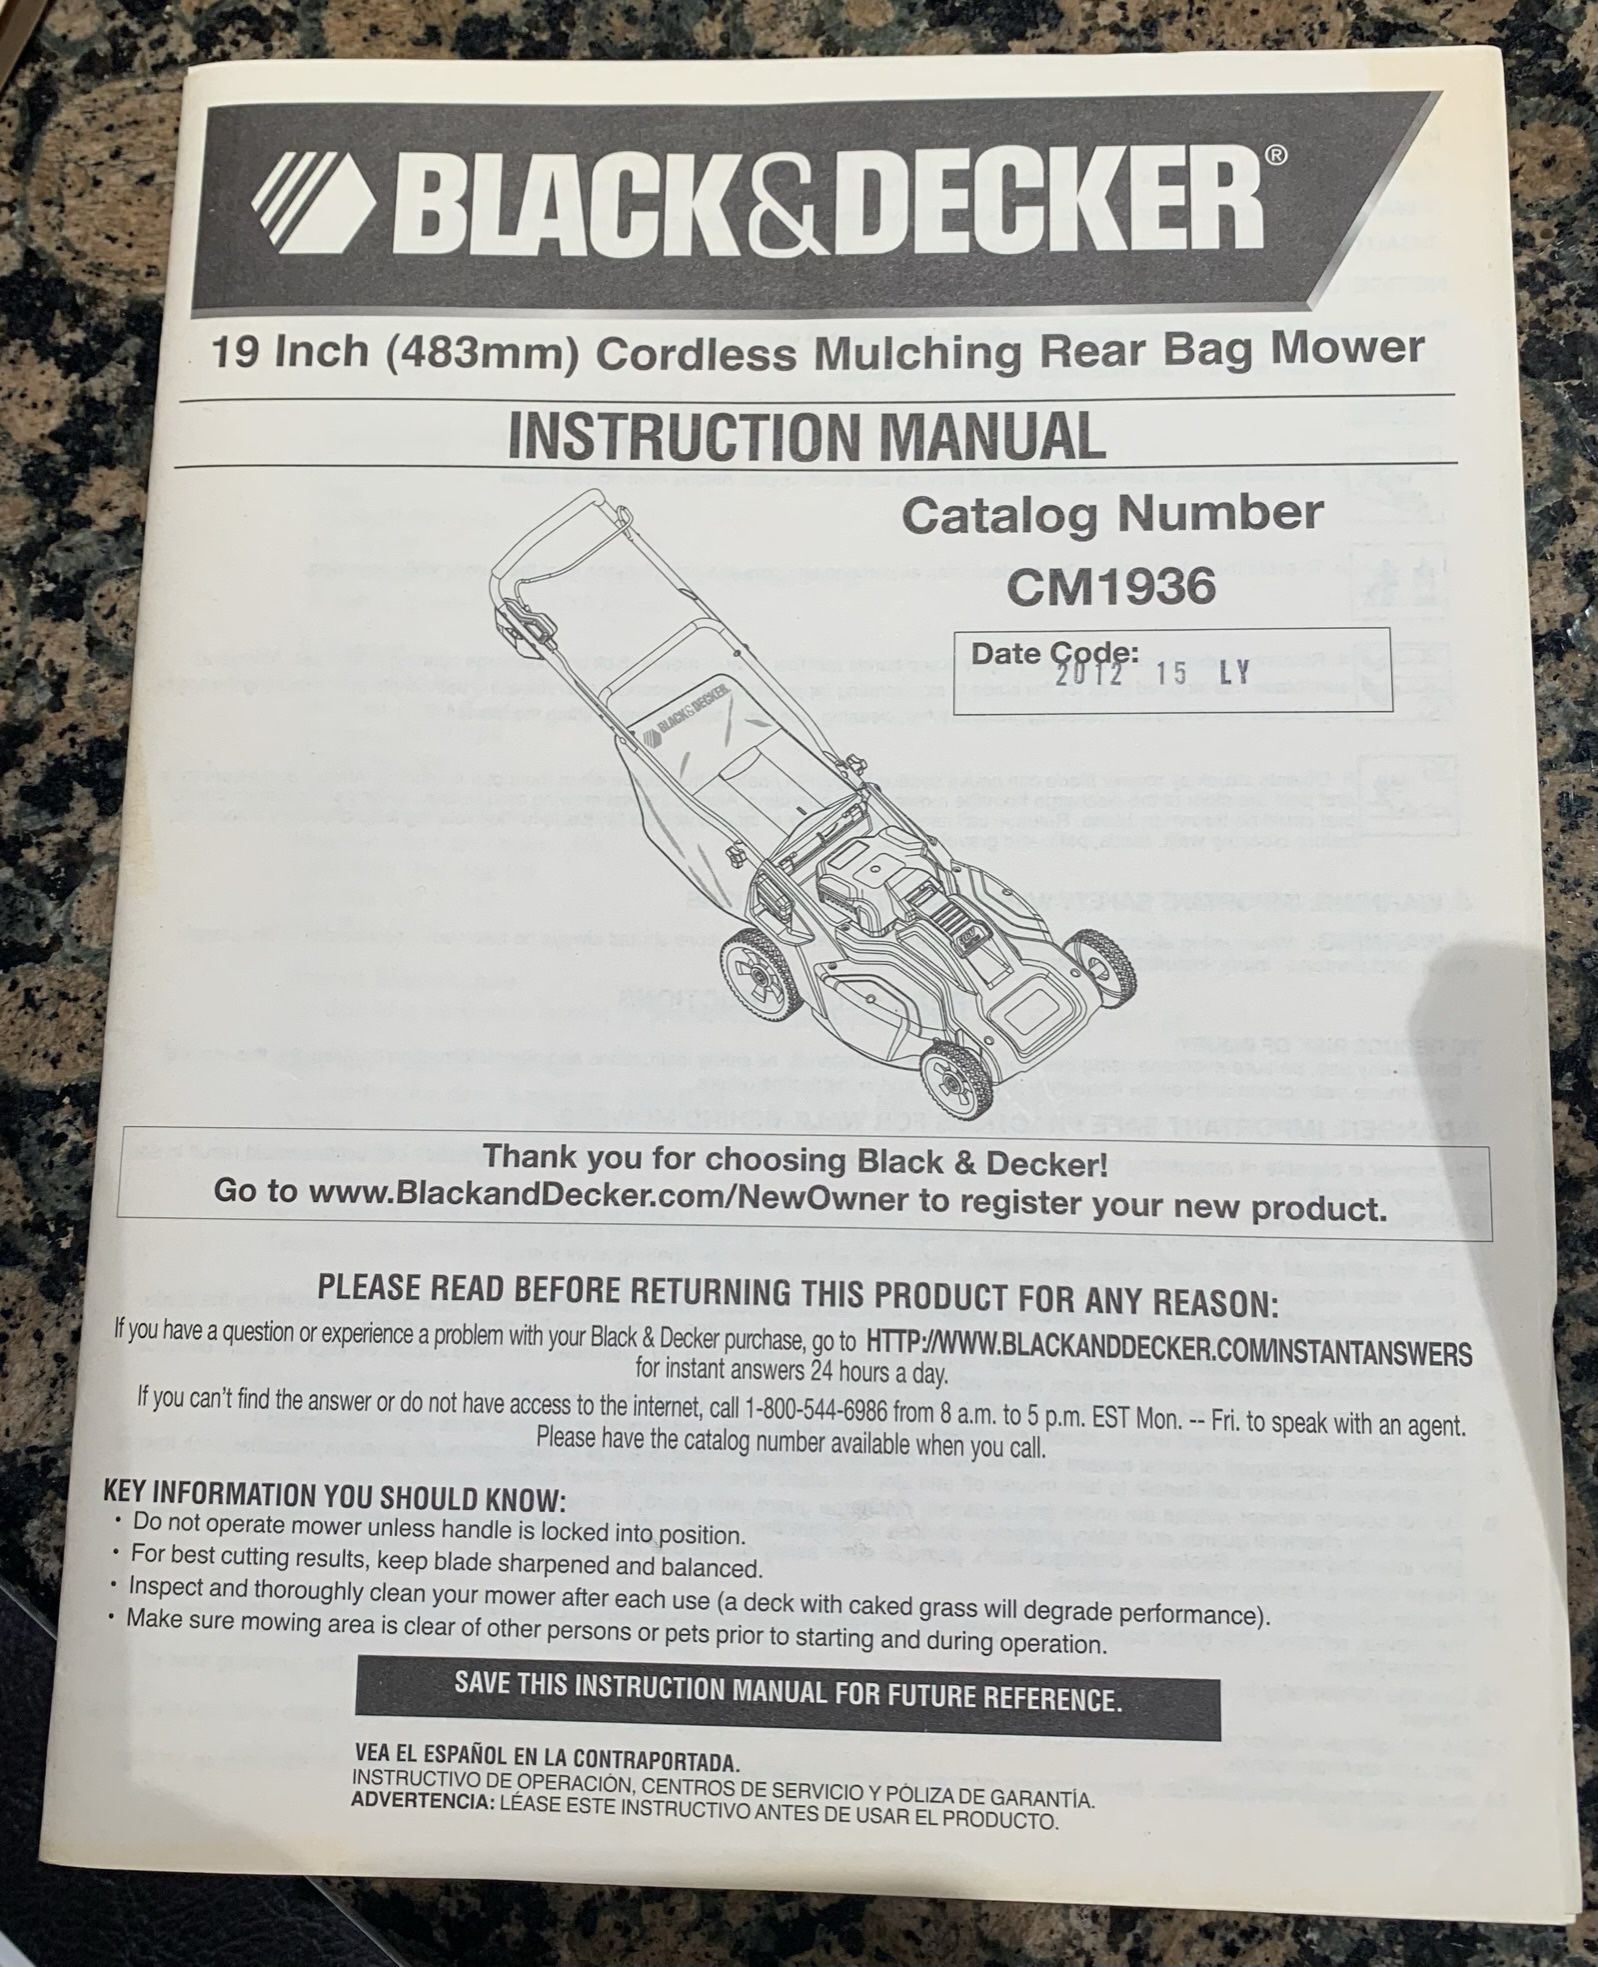 Black & Decker 19” Cordlesss Mulching Mower Instructions Manual ONLY (FREE if Pick Up)